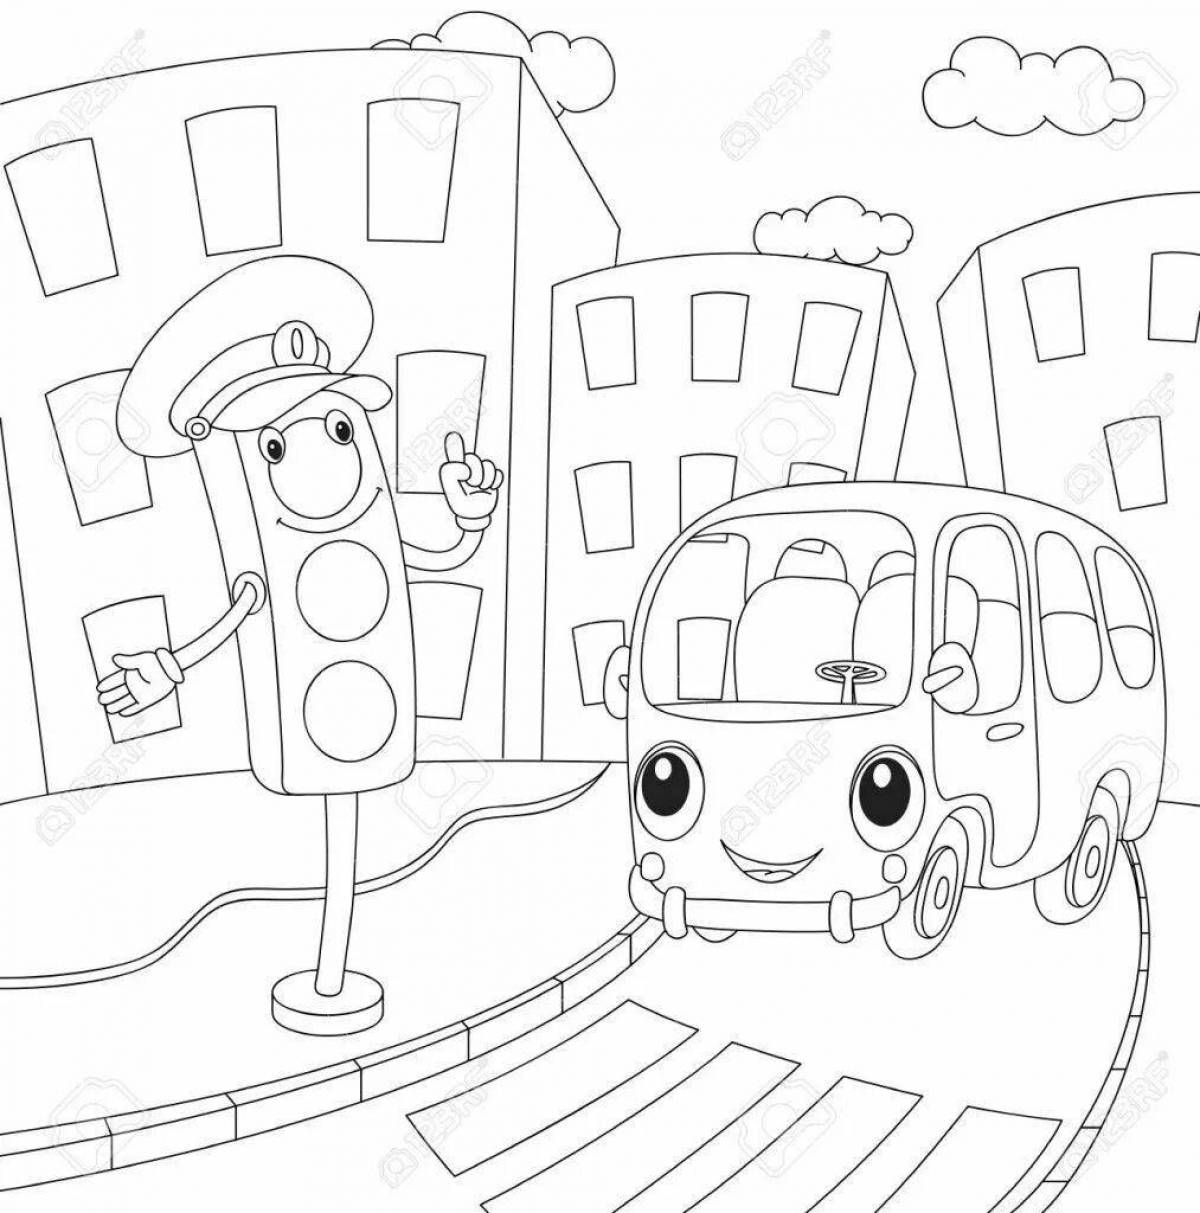 Funny safe road coloring page